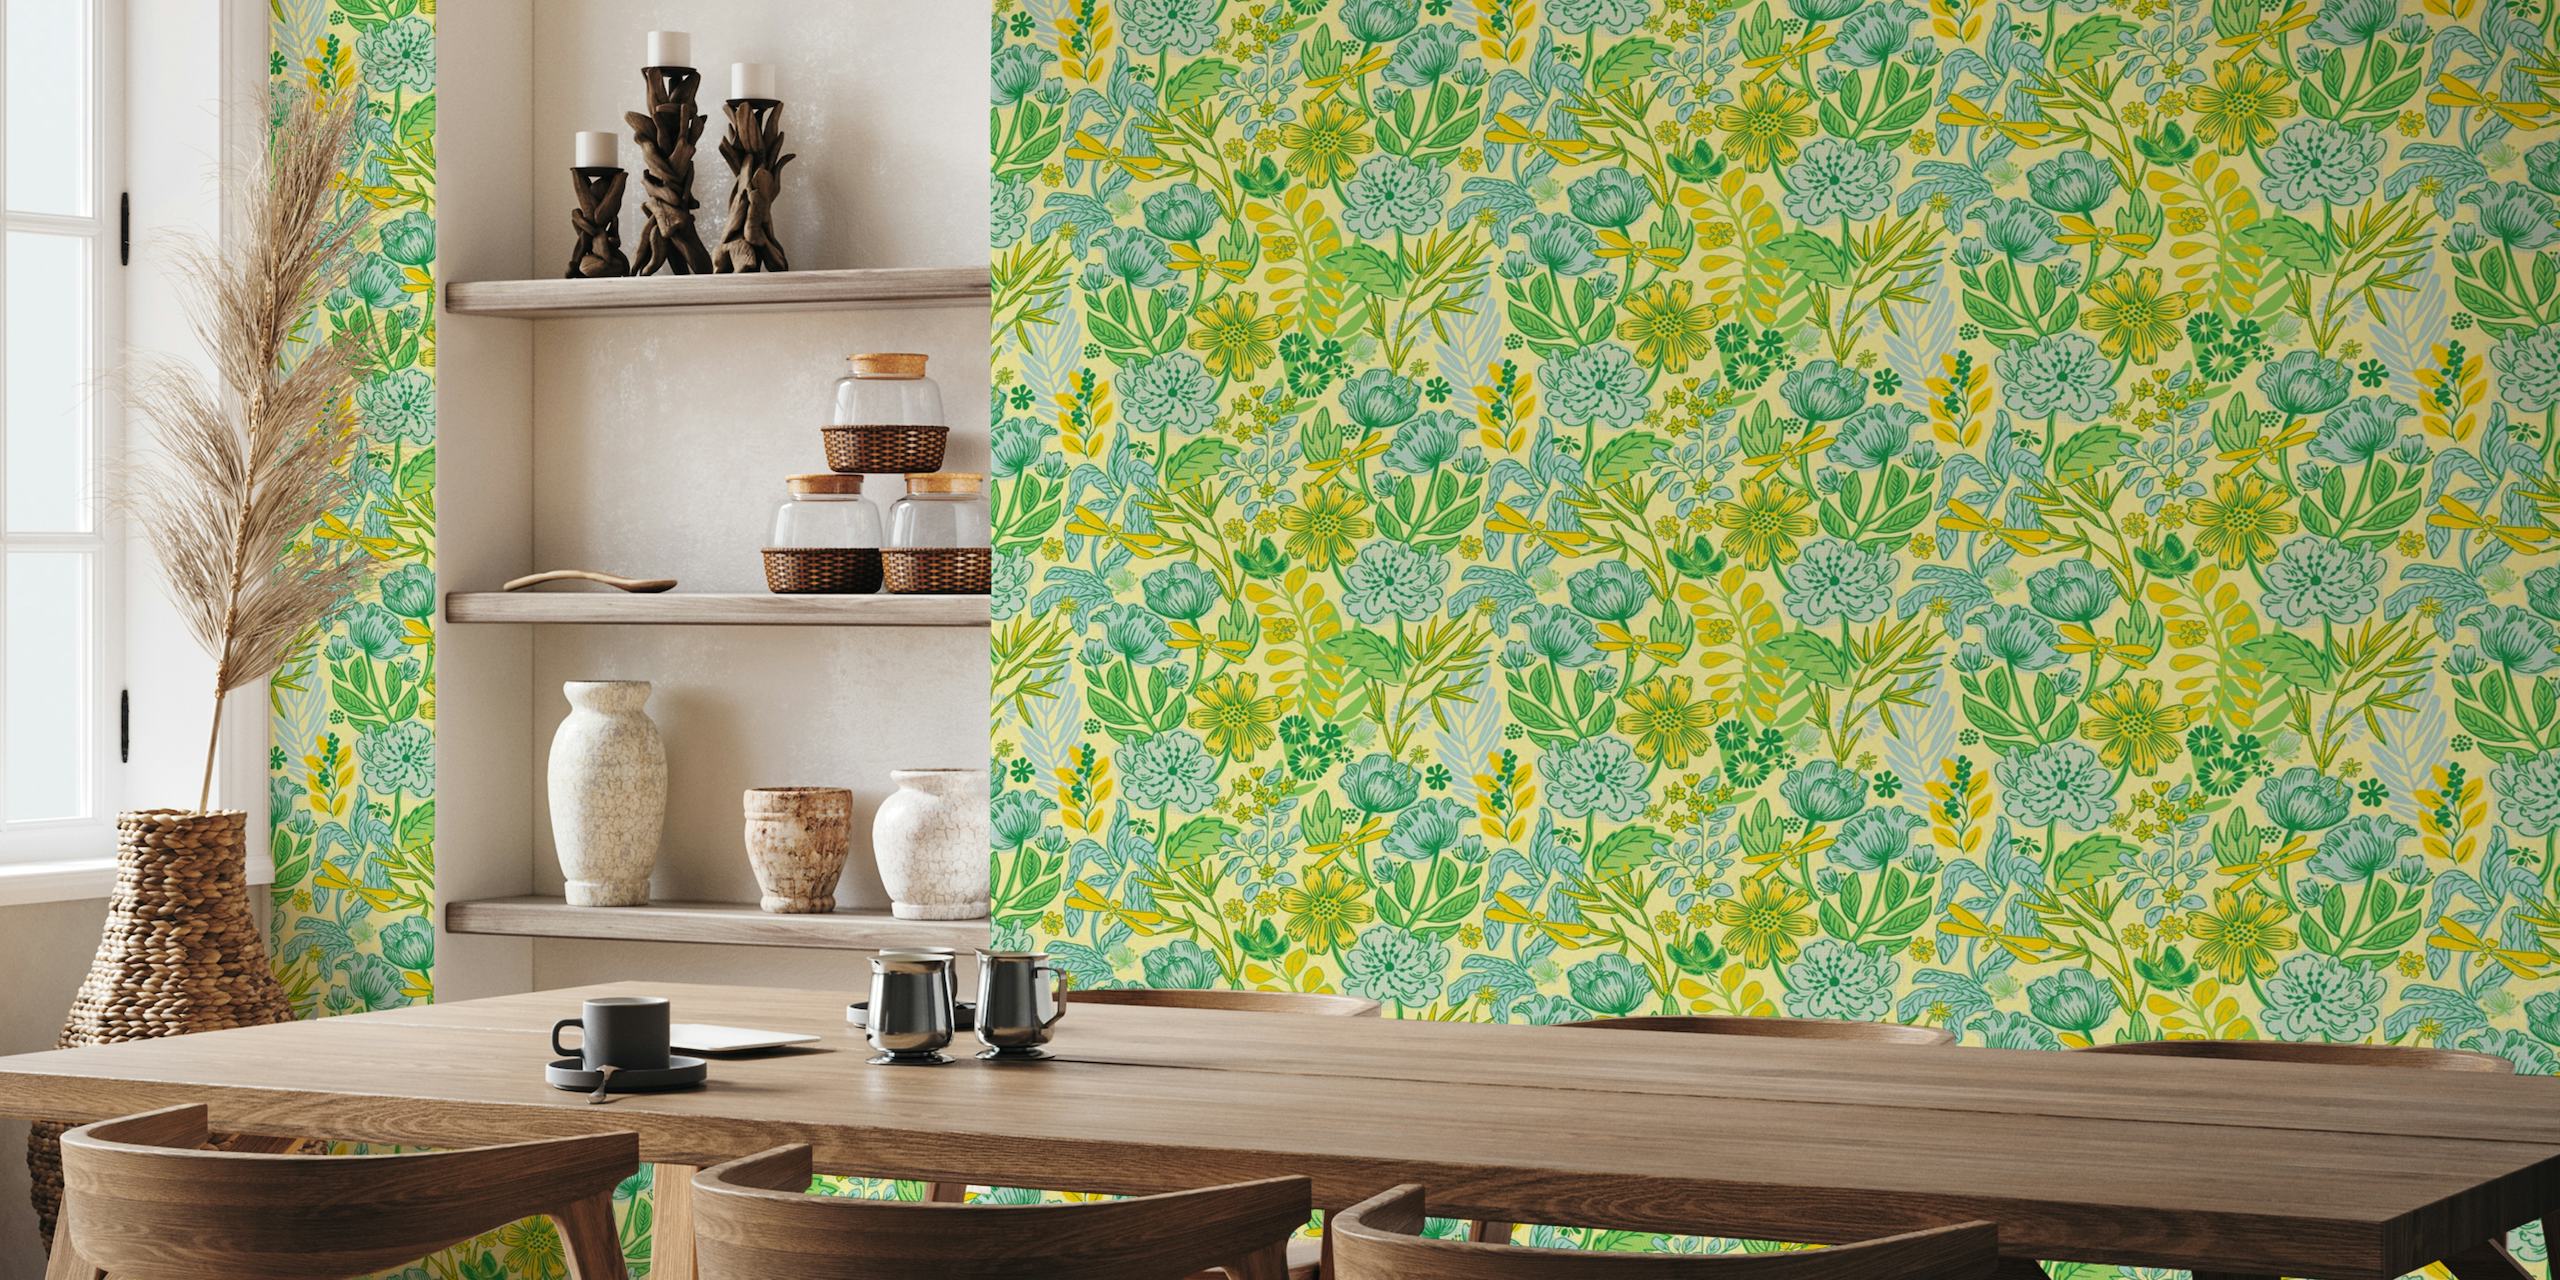 Bright Yellow Bohemian Floral wall mural with green botanical patterns